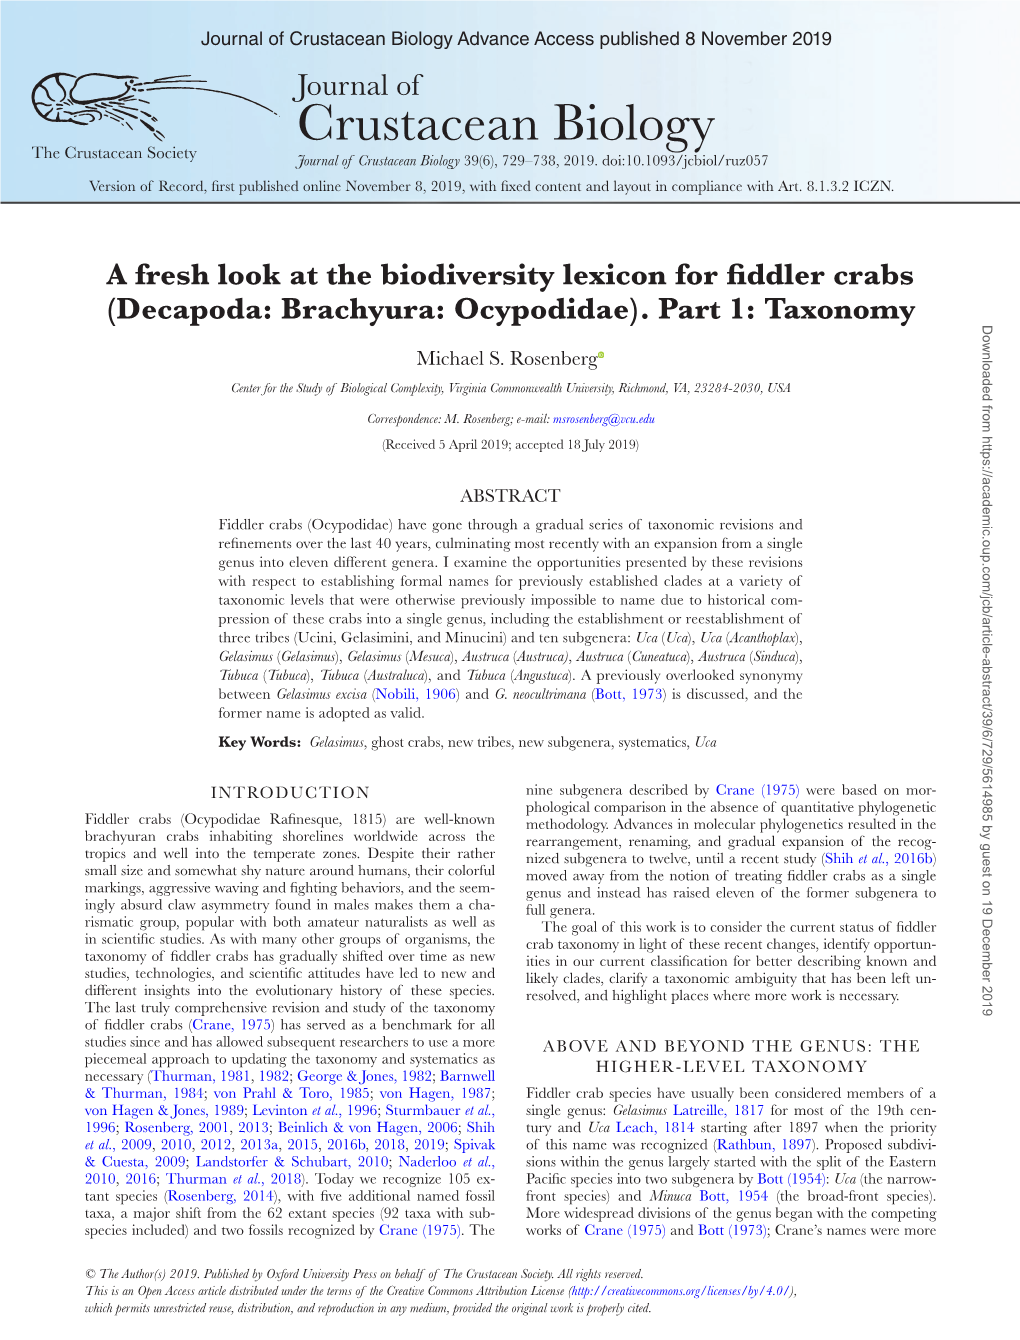 (Decapoda: Brachyura: Ocypodidae). Part 1: Taxonomy Downloaded from by Guest on 19 December 2019